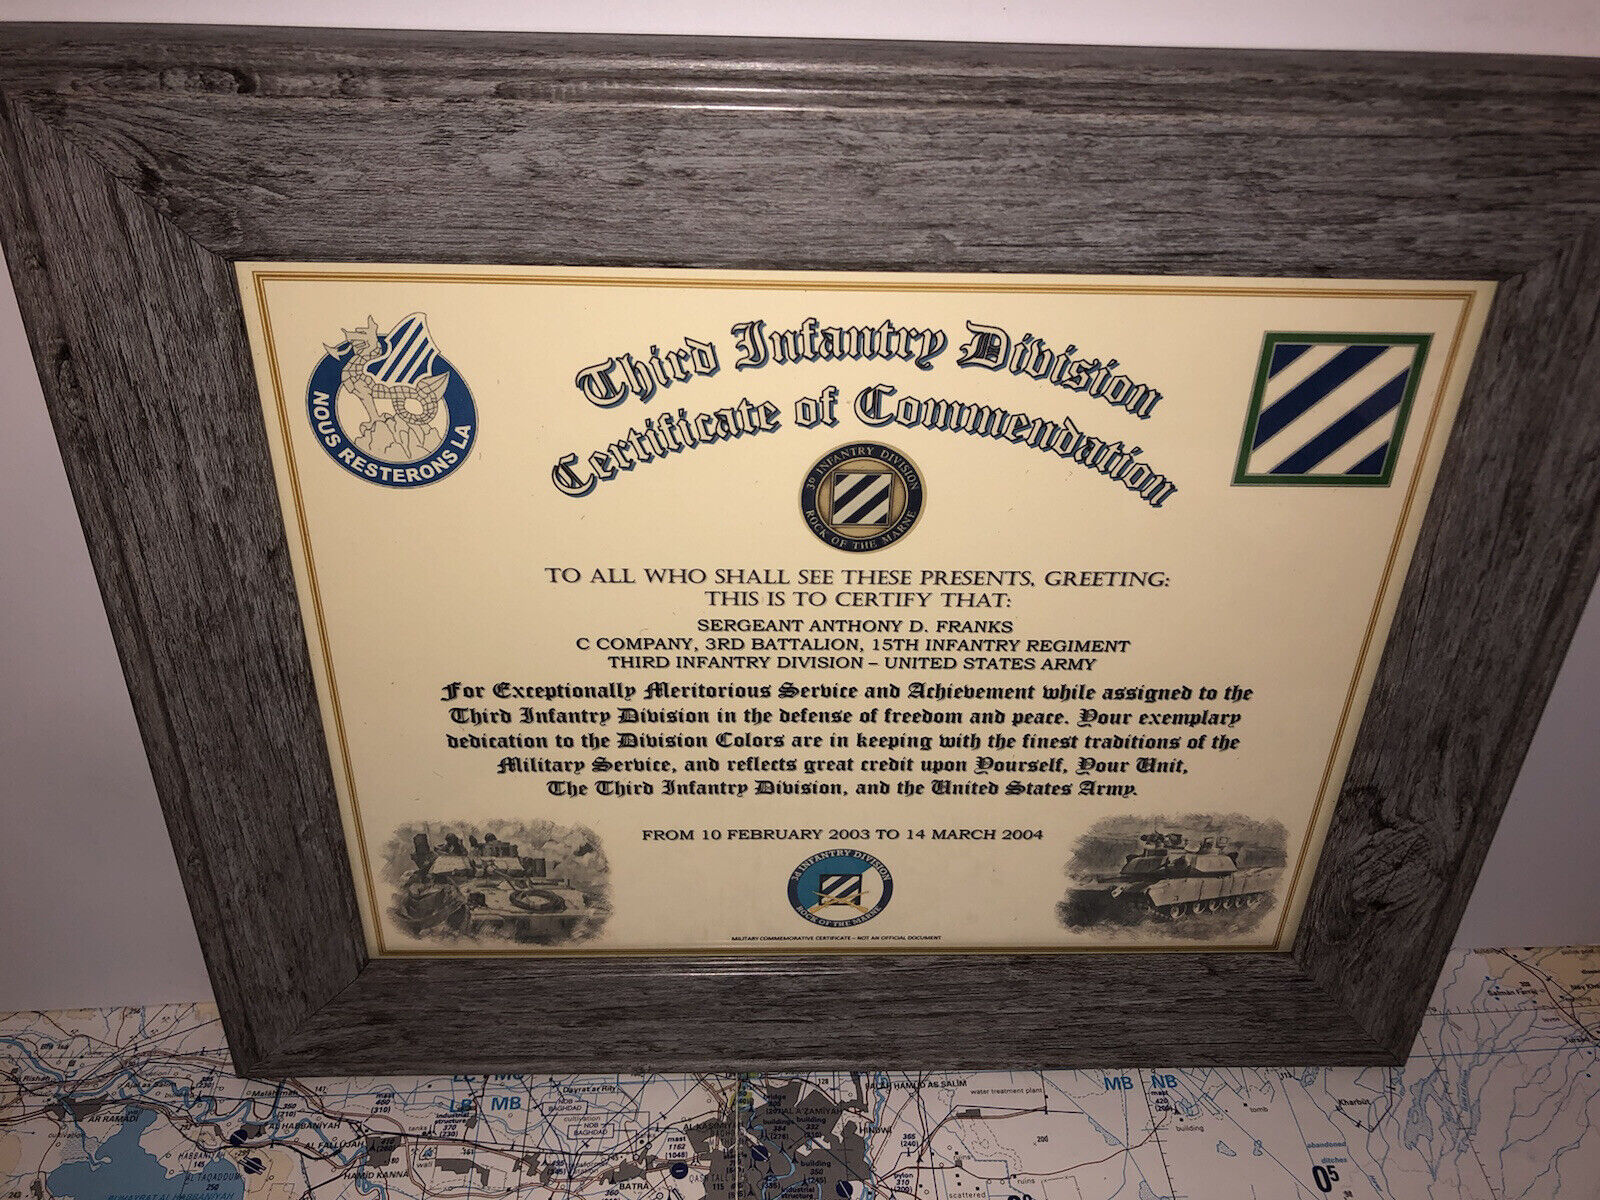 3RD INFANTRY DIVISION / COMMEMORATIVE - CERTIFICATE OF COMMENDATION